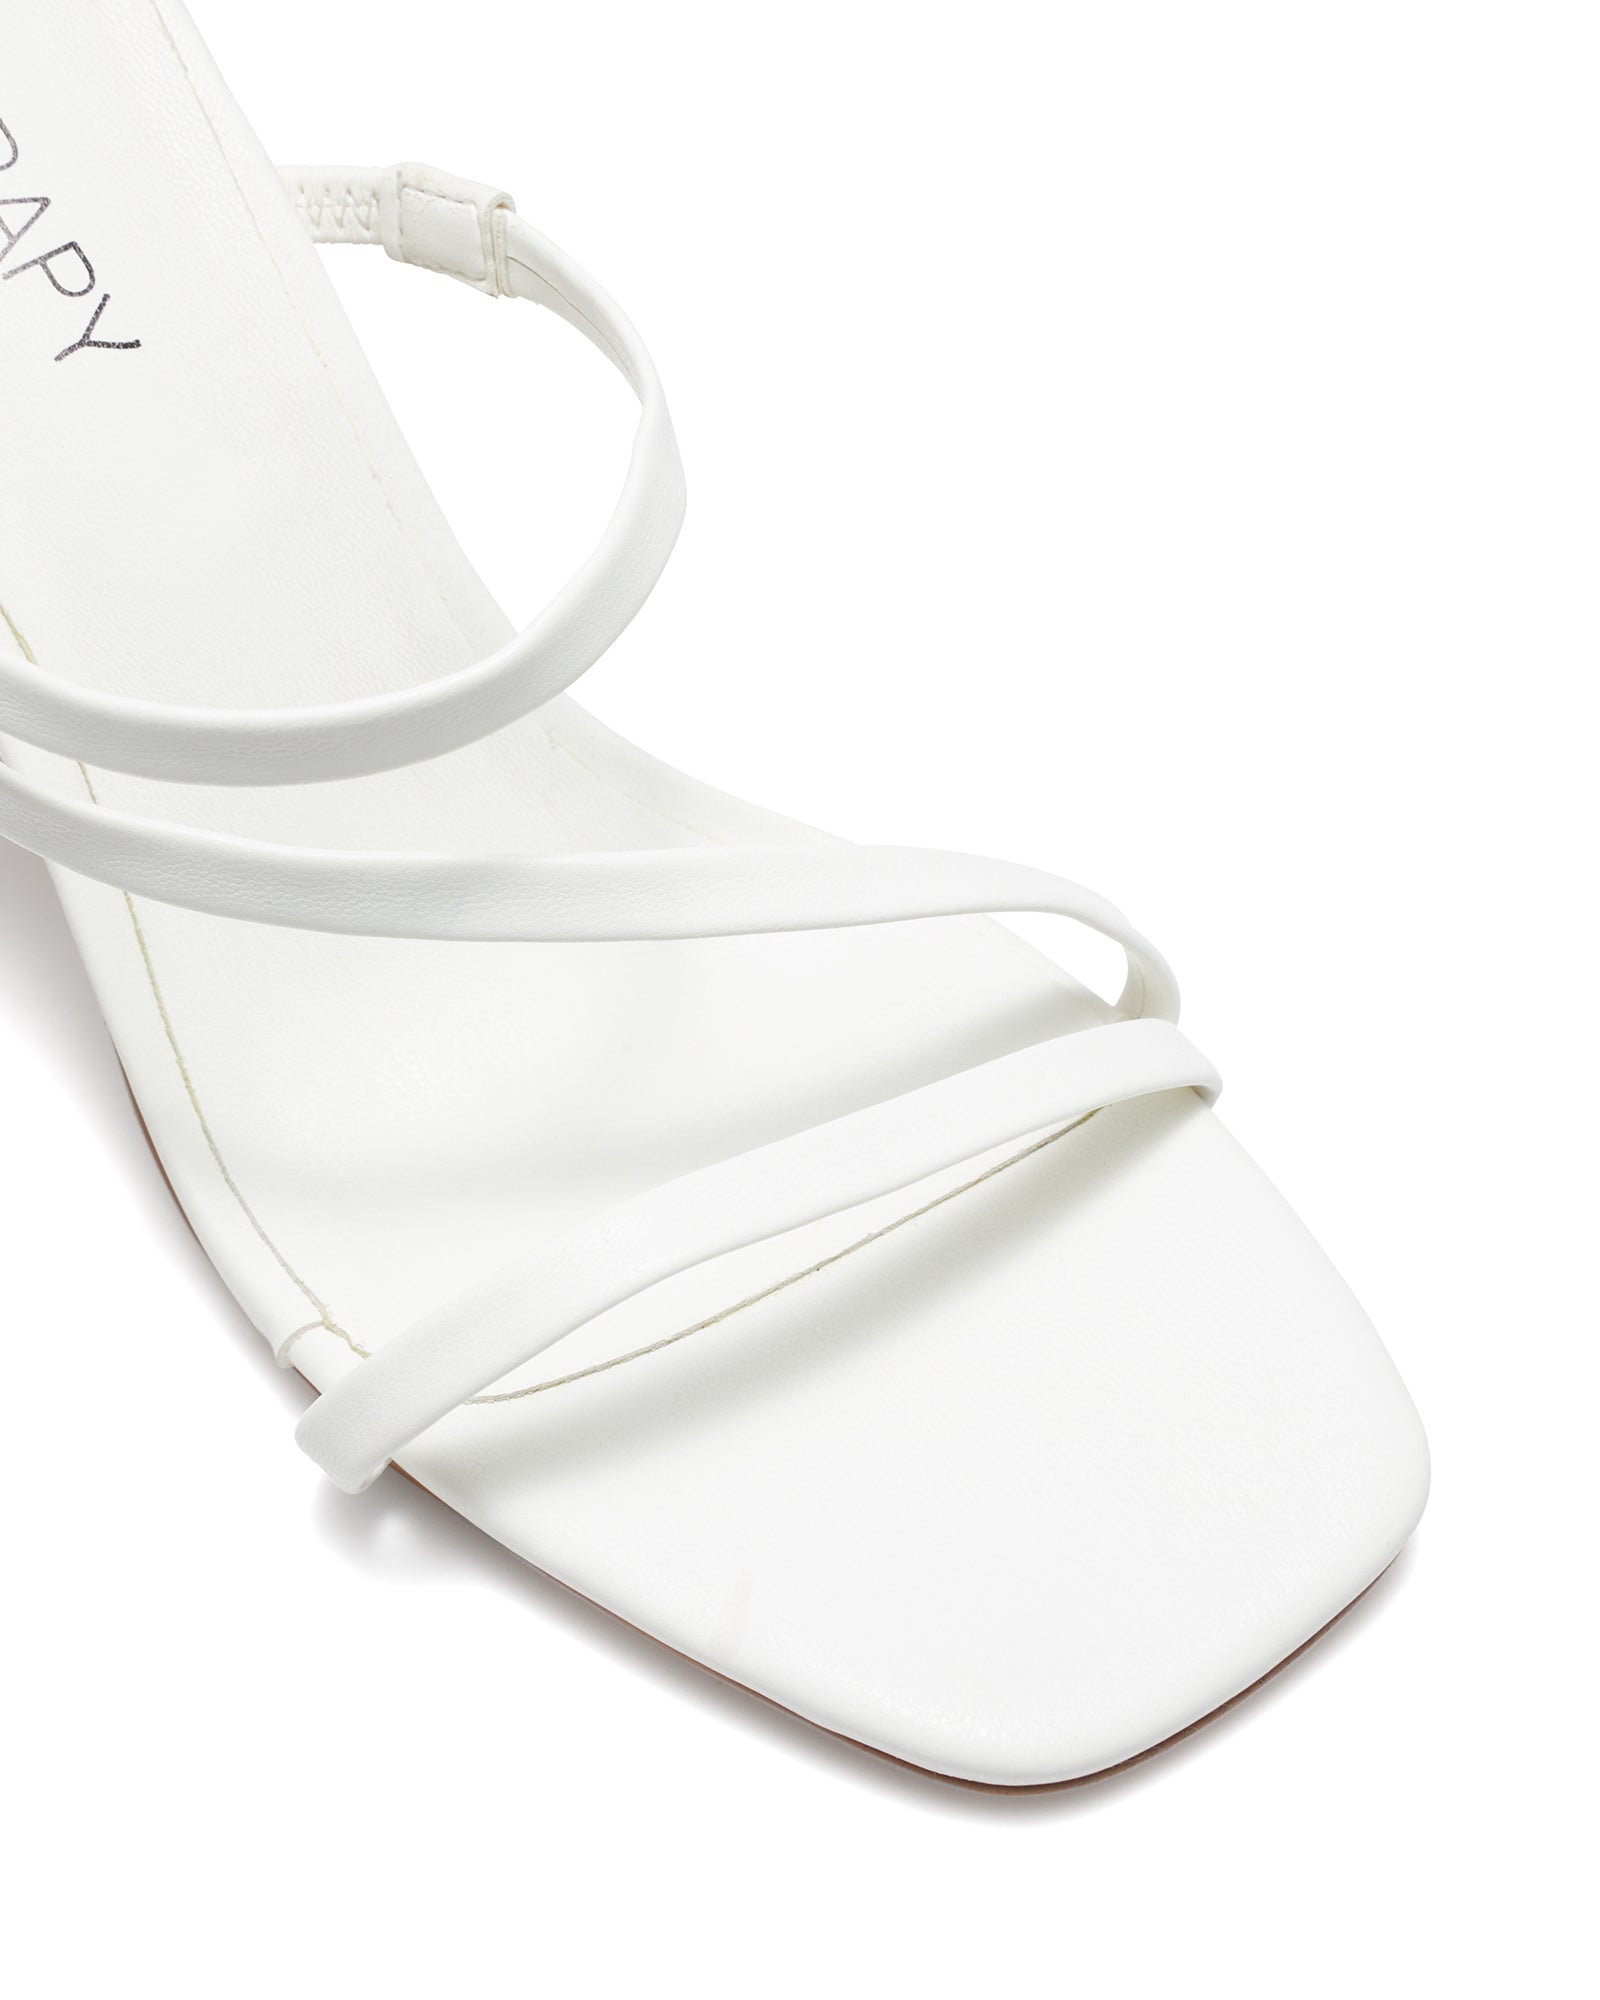 Therapy Shoes Brooklyn White | Women's Heels | Mule | Strappy | Dress